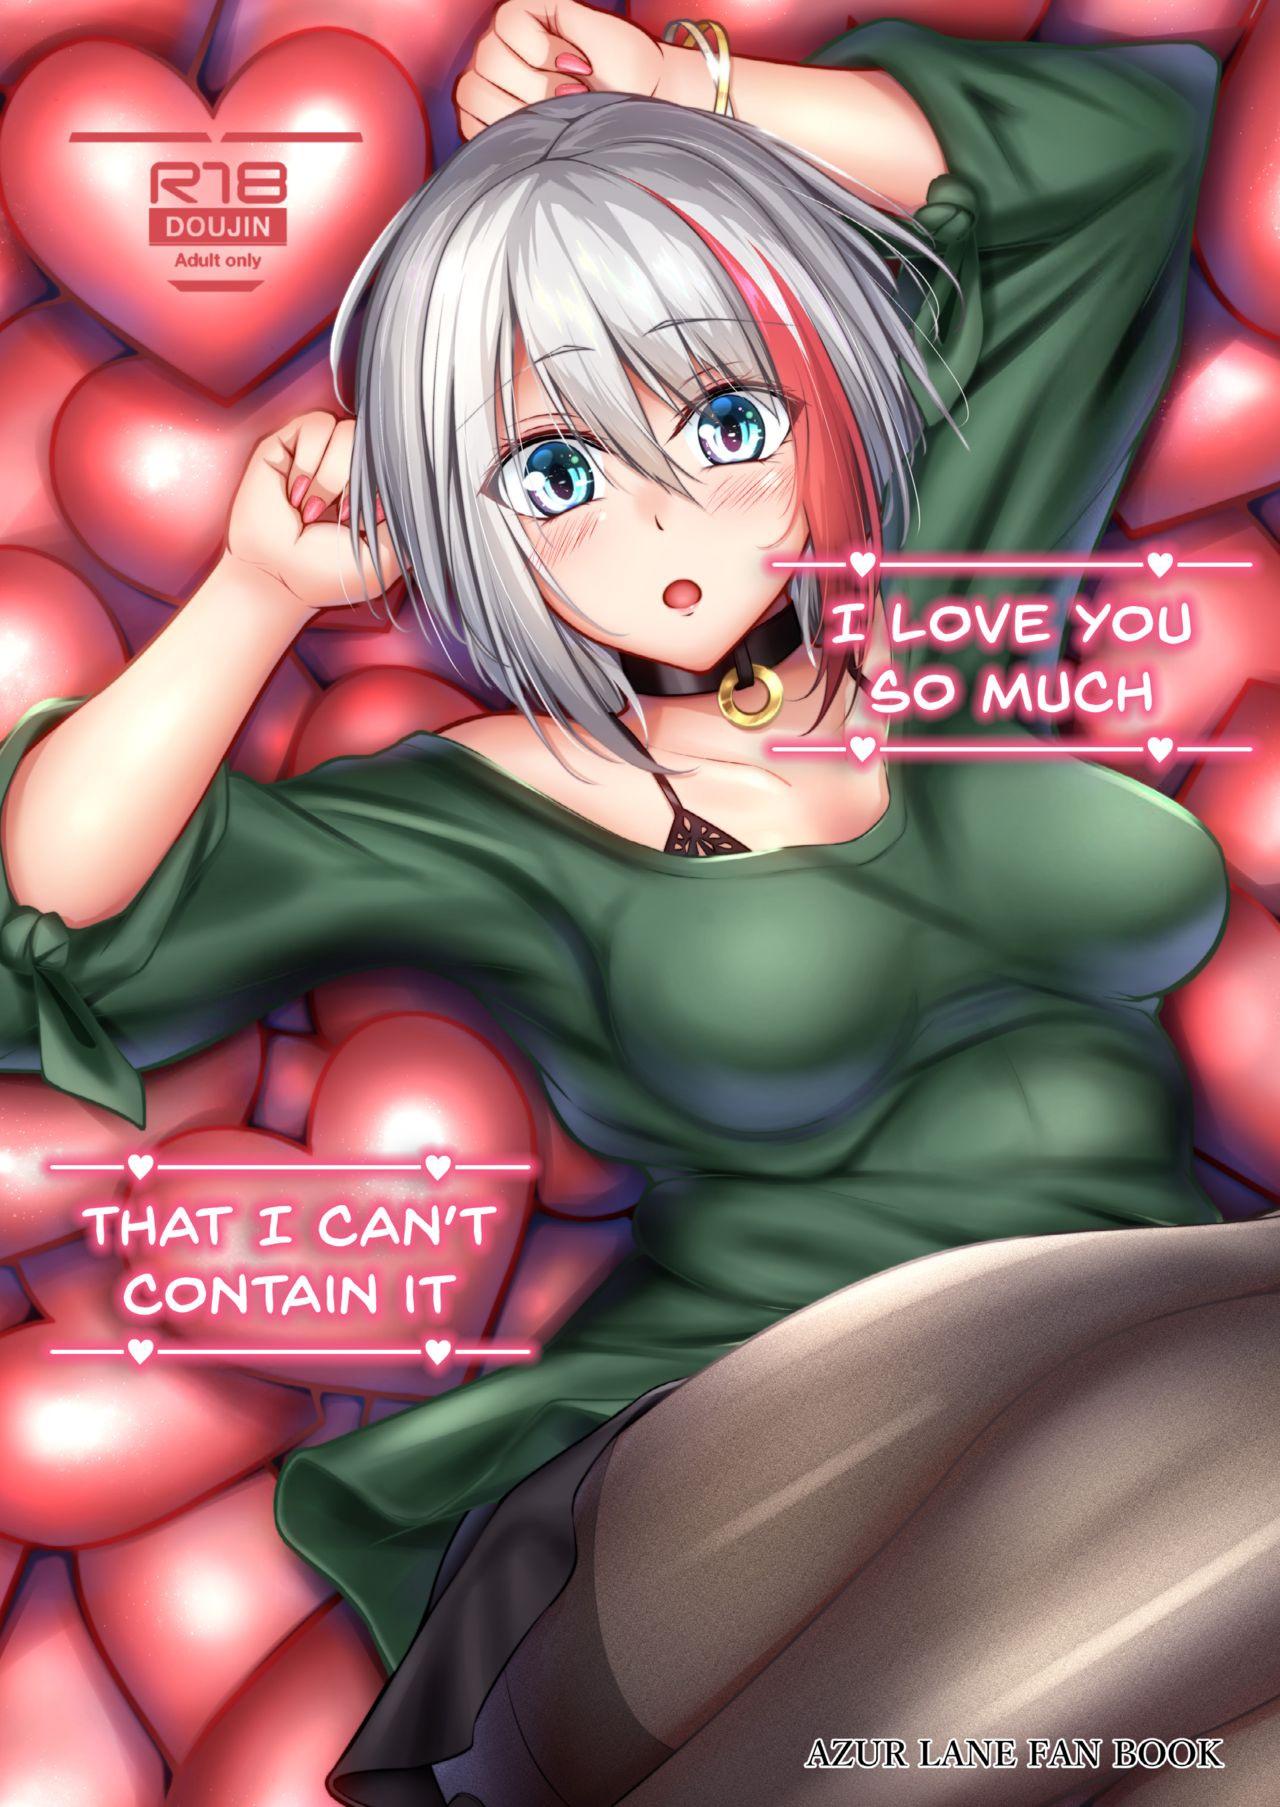  I love you so much, that I can\'t contain it (Azur Lane) | Comics (Doujins)  Hentai | Anime Hentai